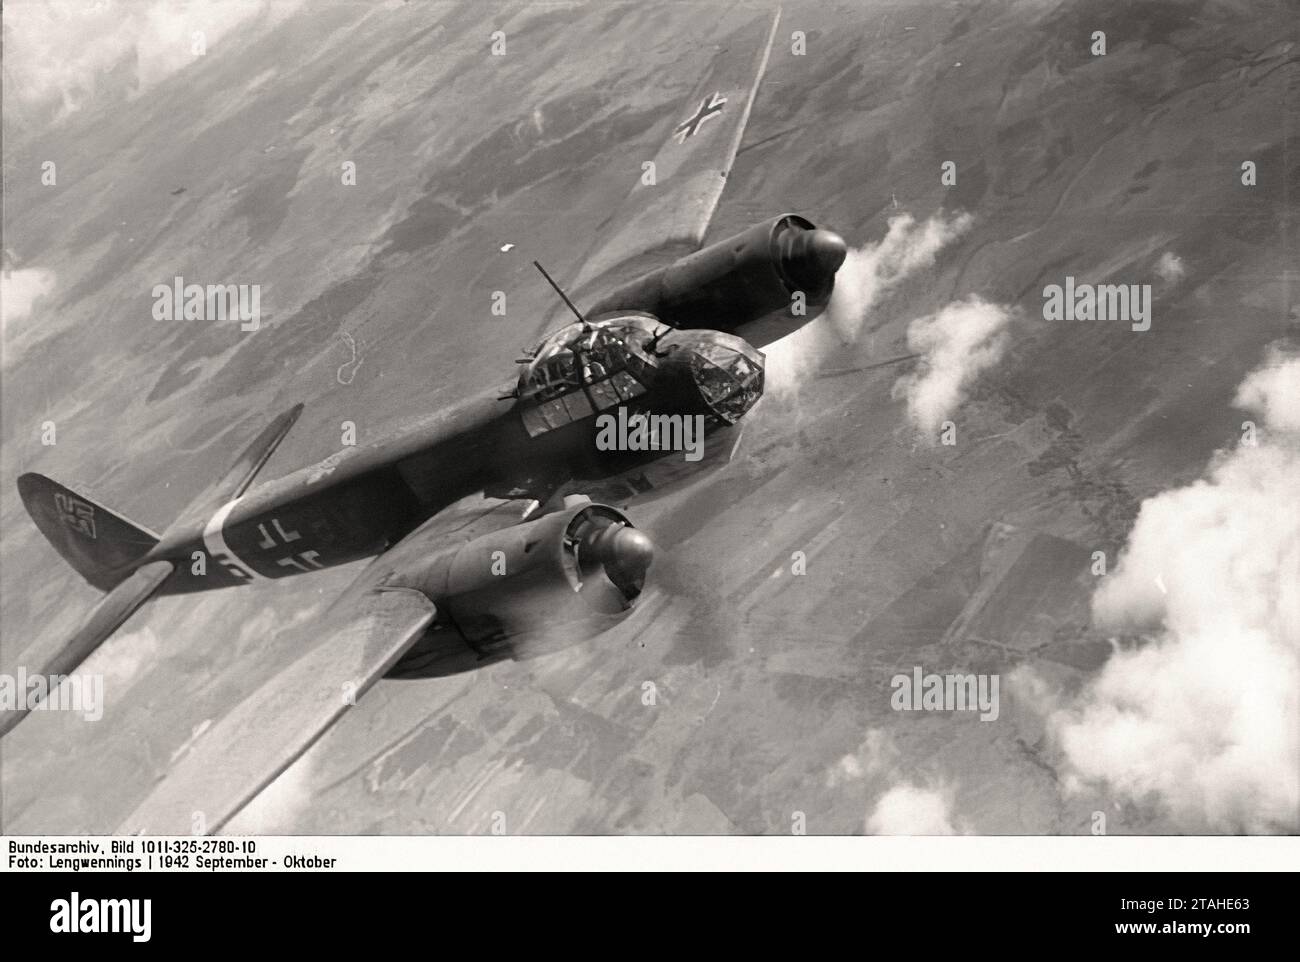 Airplane - Junkers Ju 88 1942 over Russia (Bundesarchiv) Stock Photo